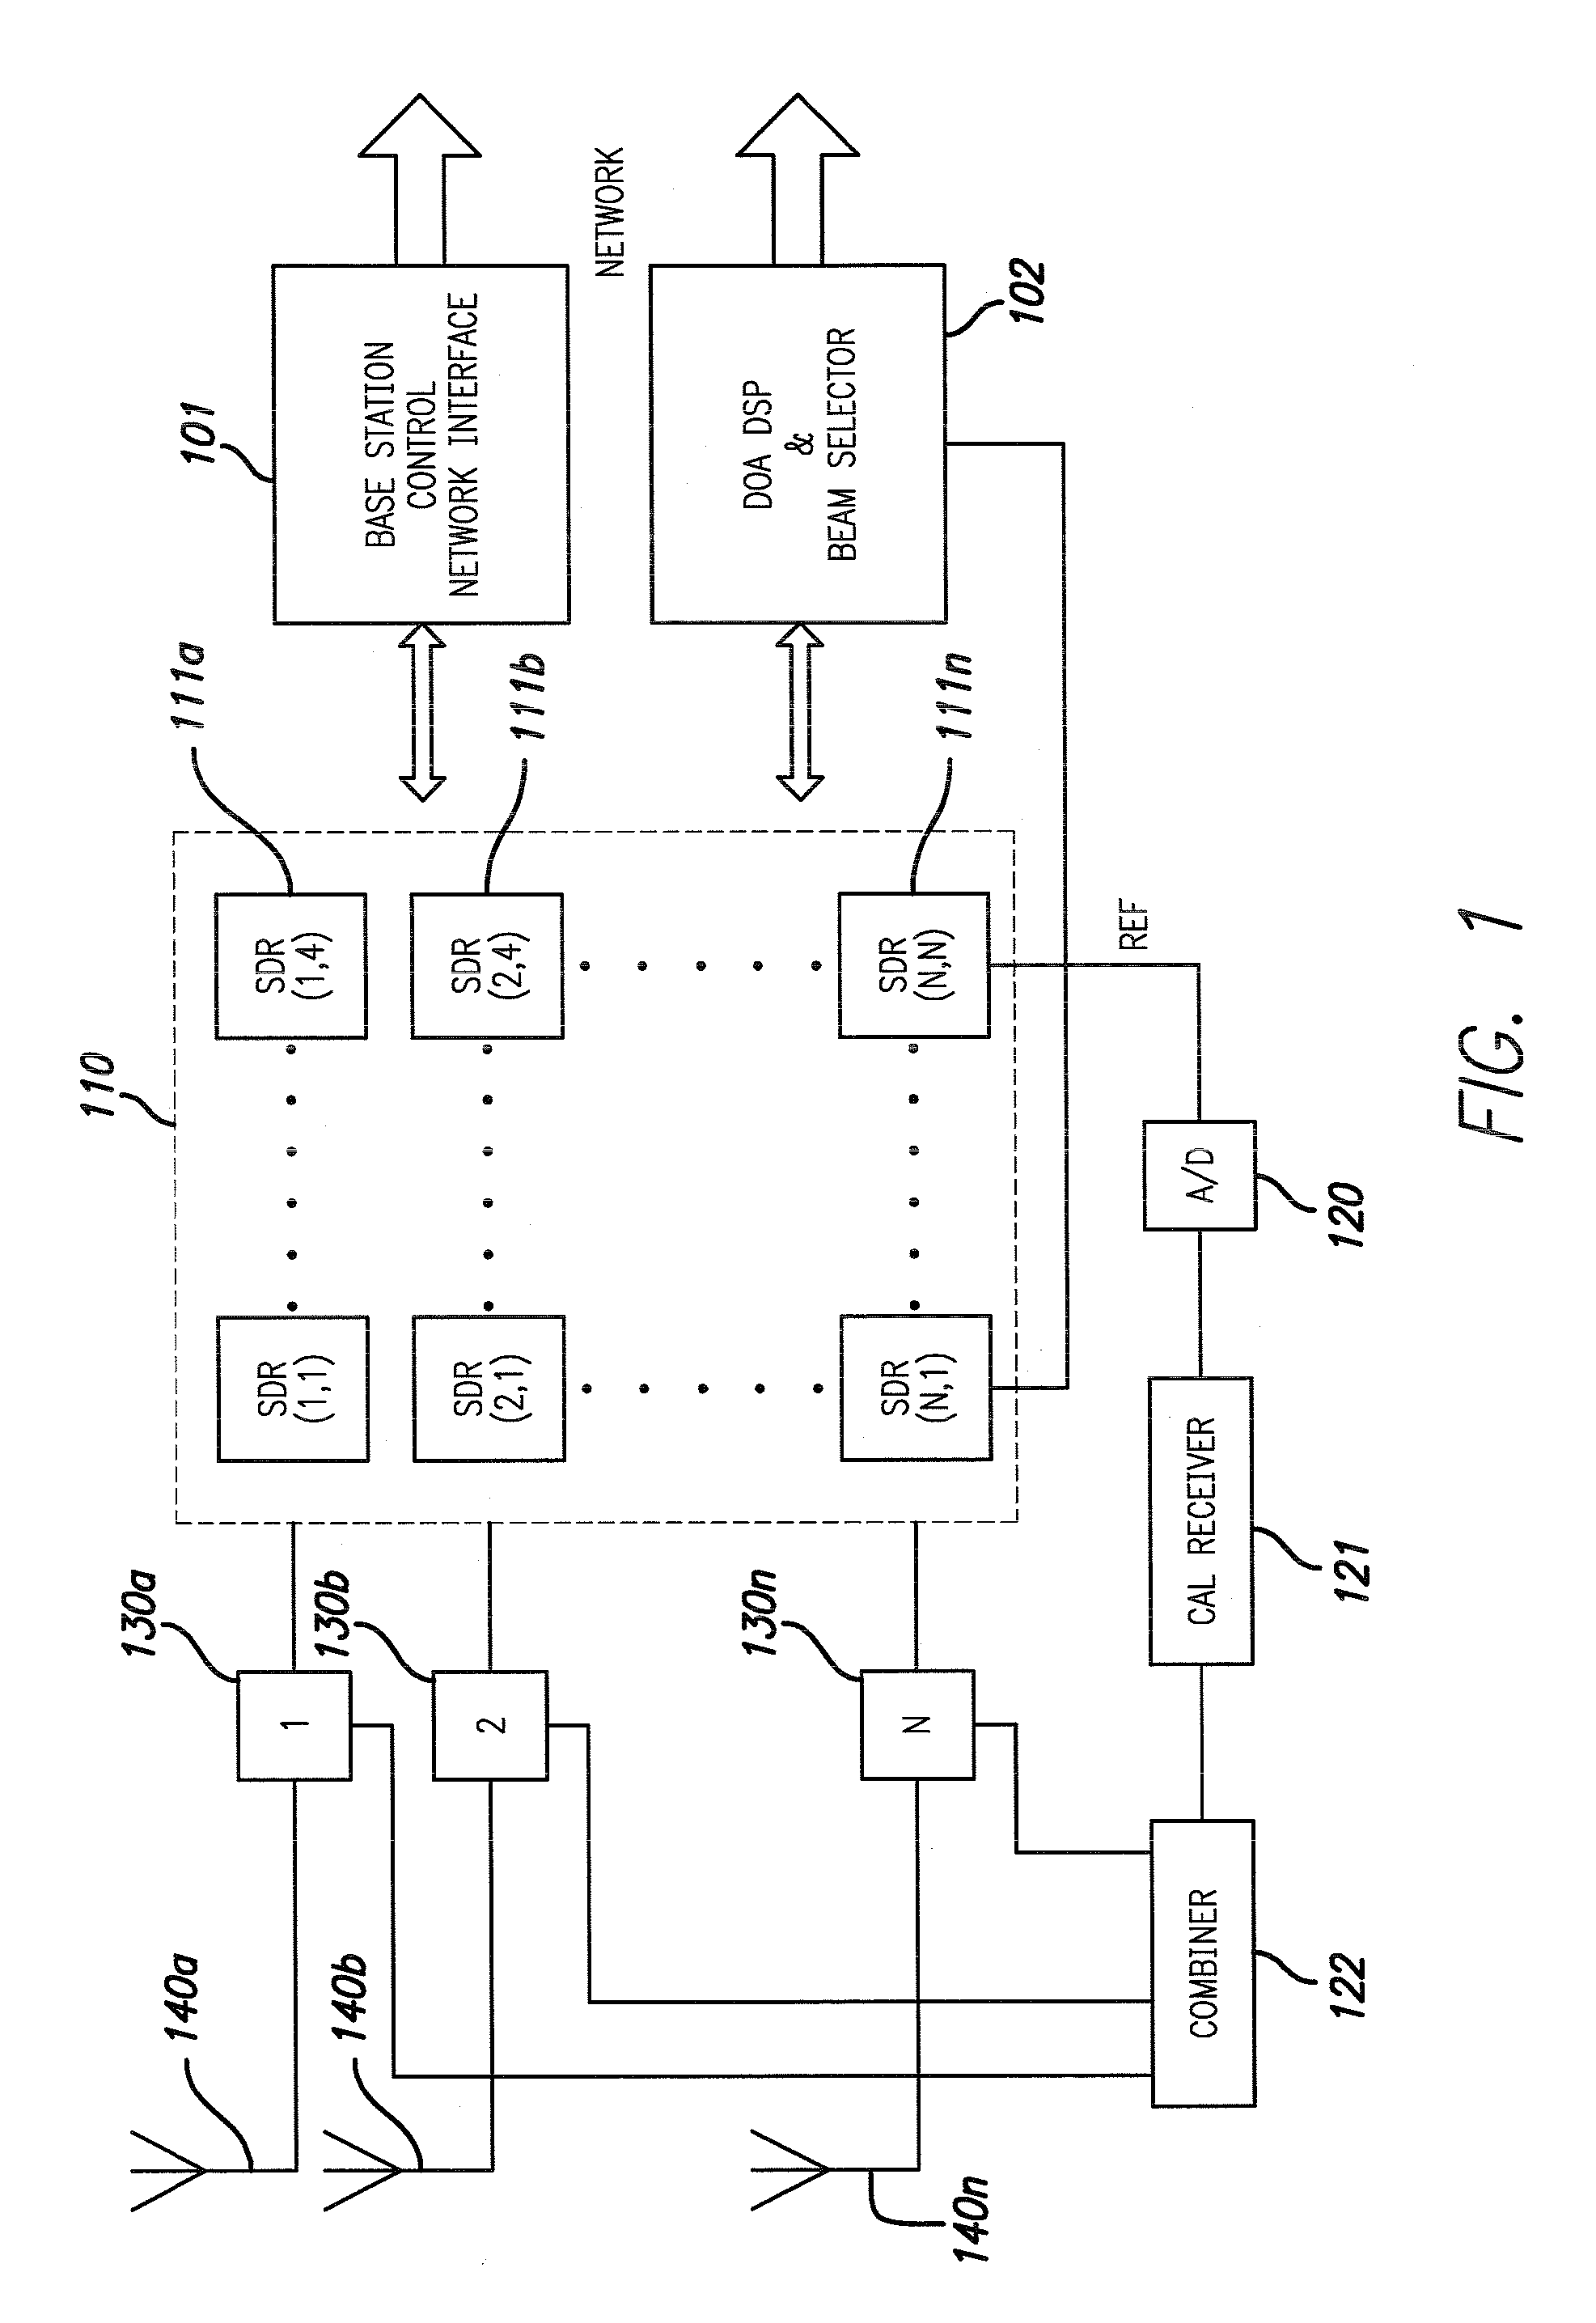 Low power multi-beam active array for cellular communications